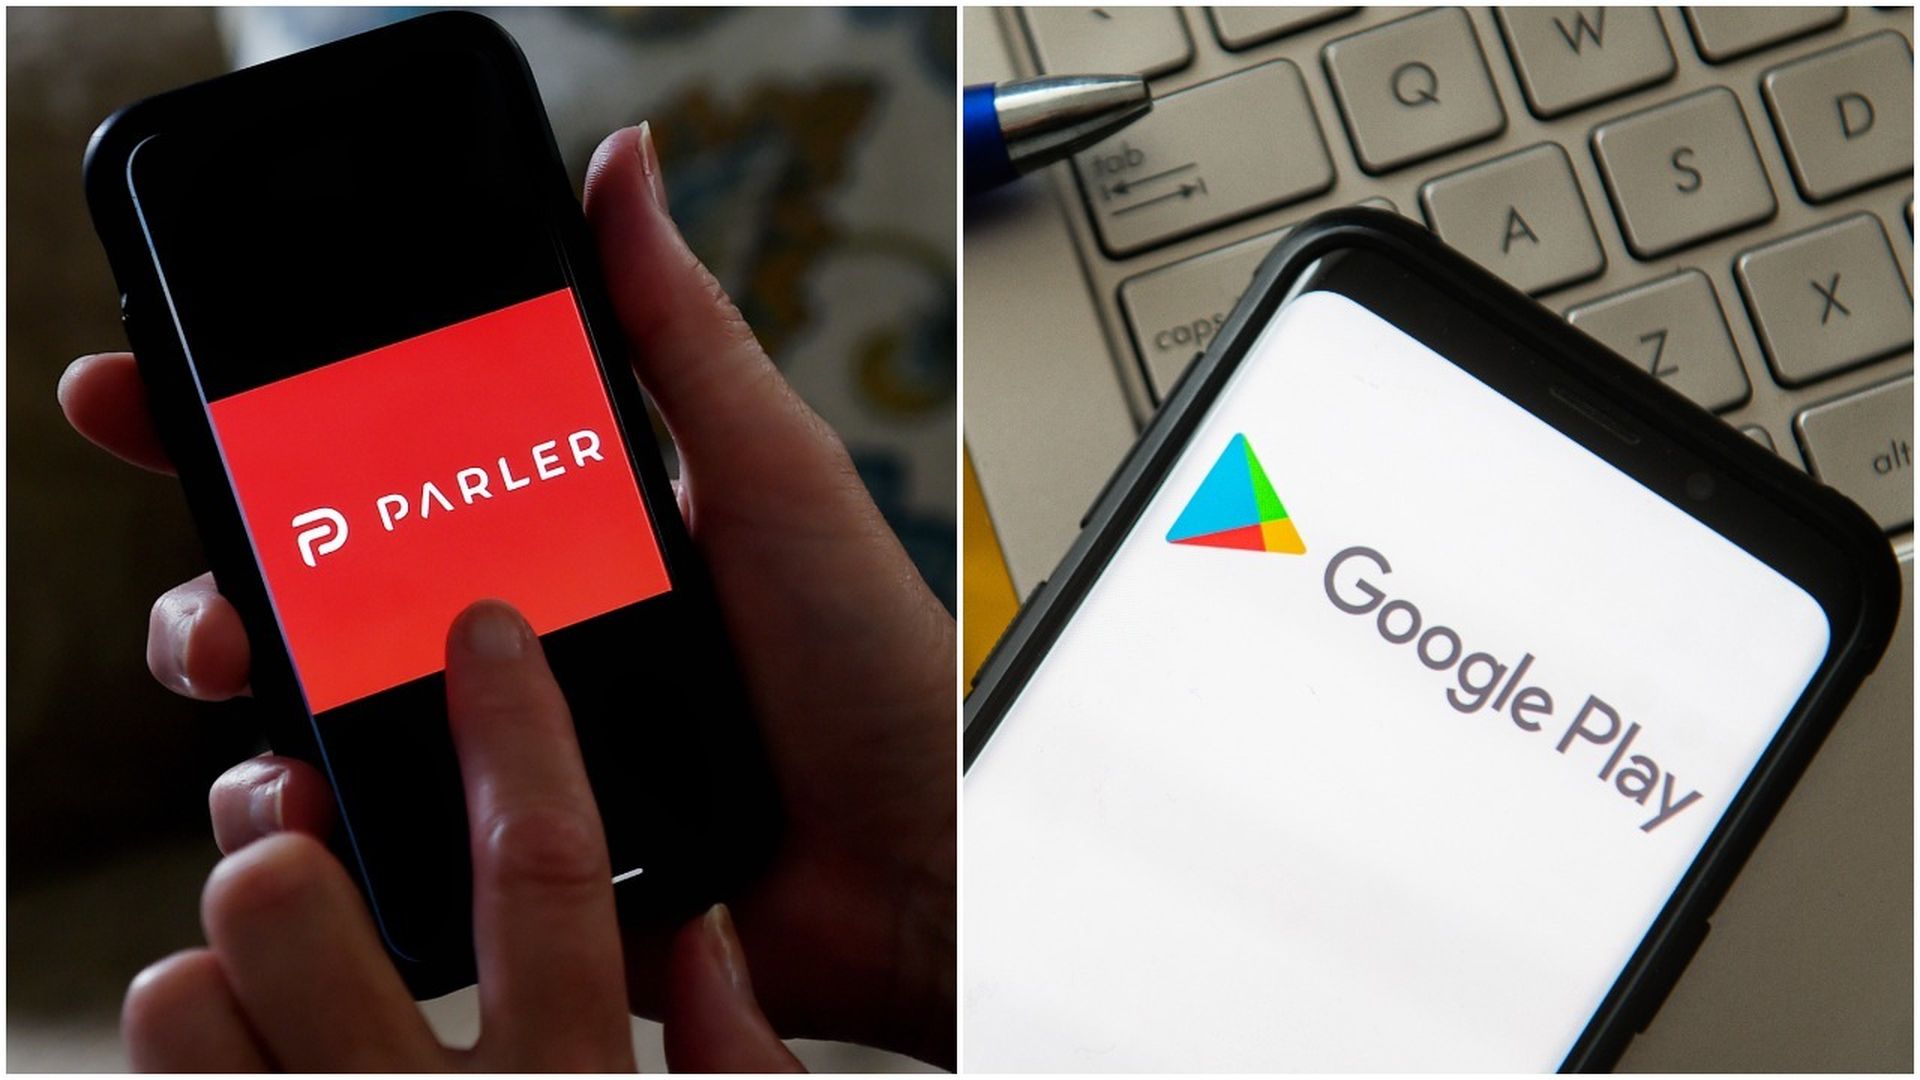 Photo of the Parler app and Google Play Store side by side